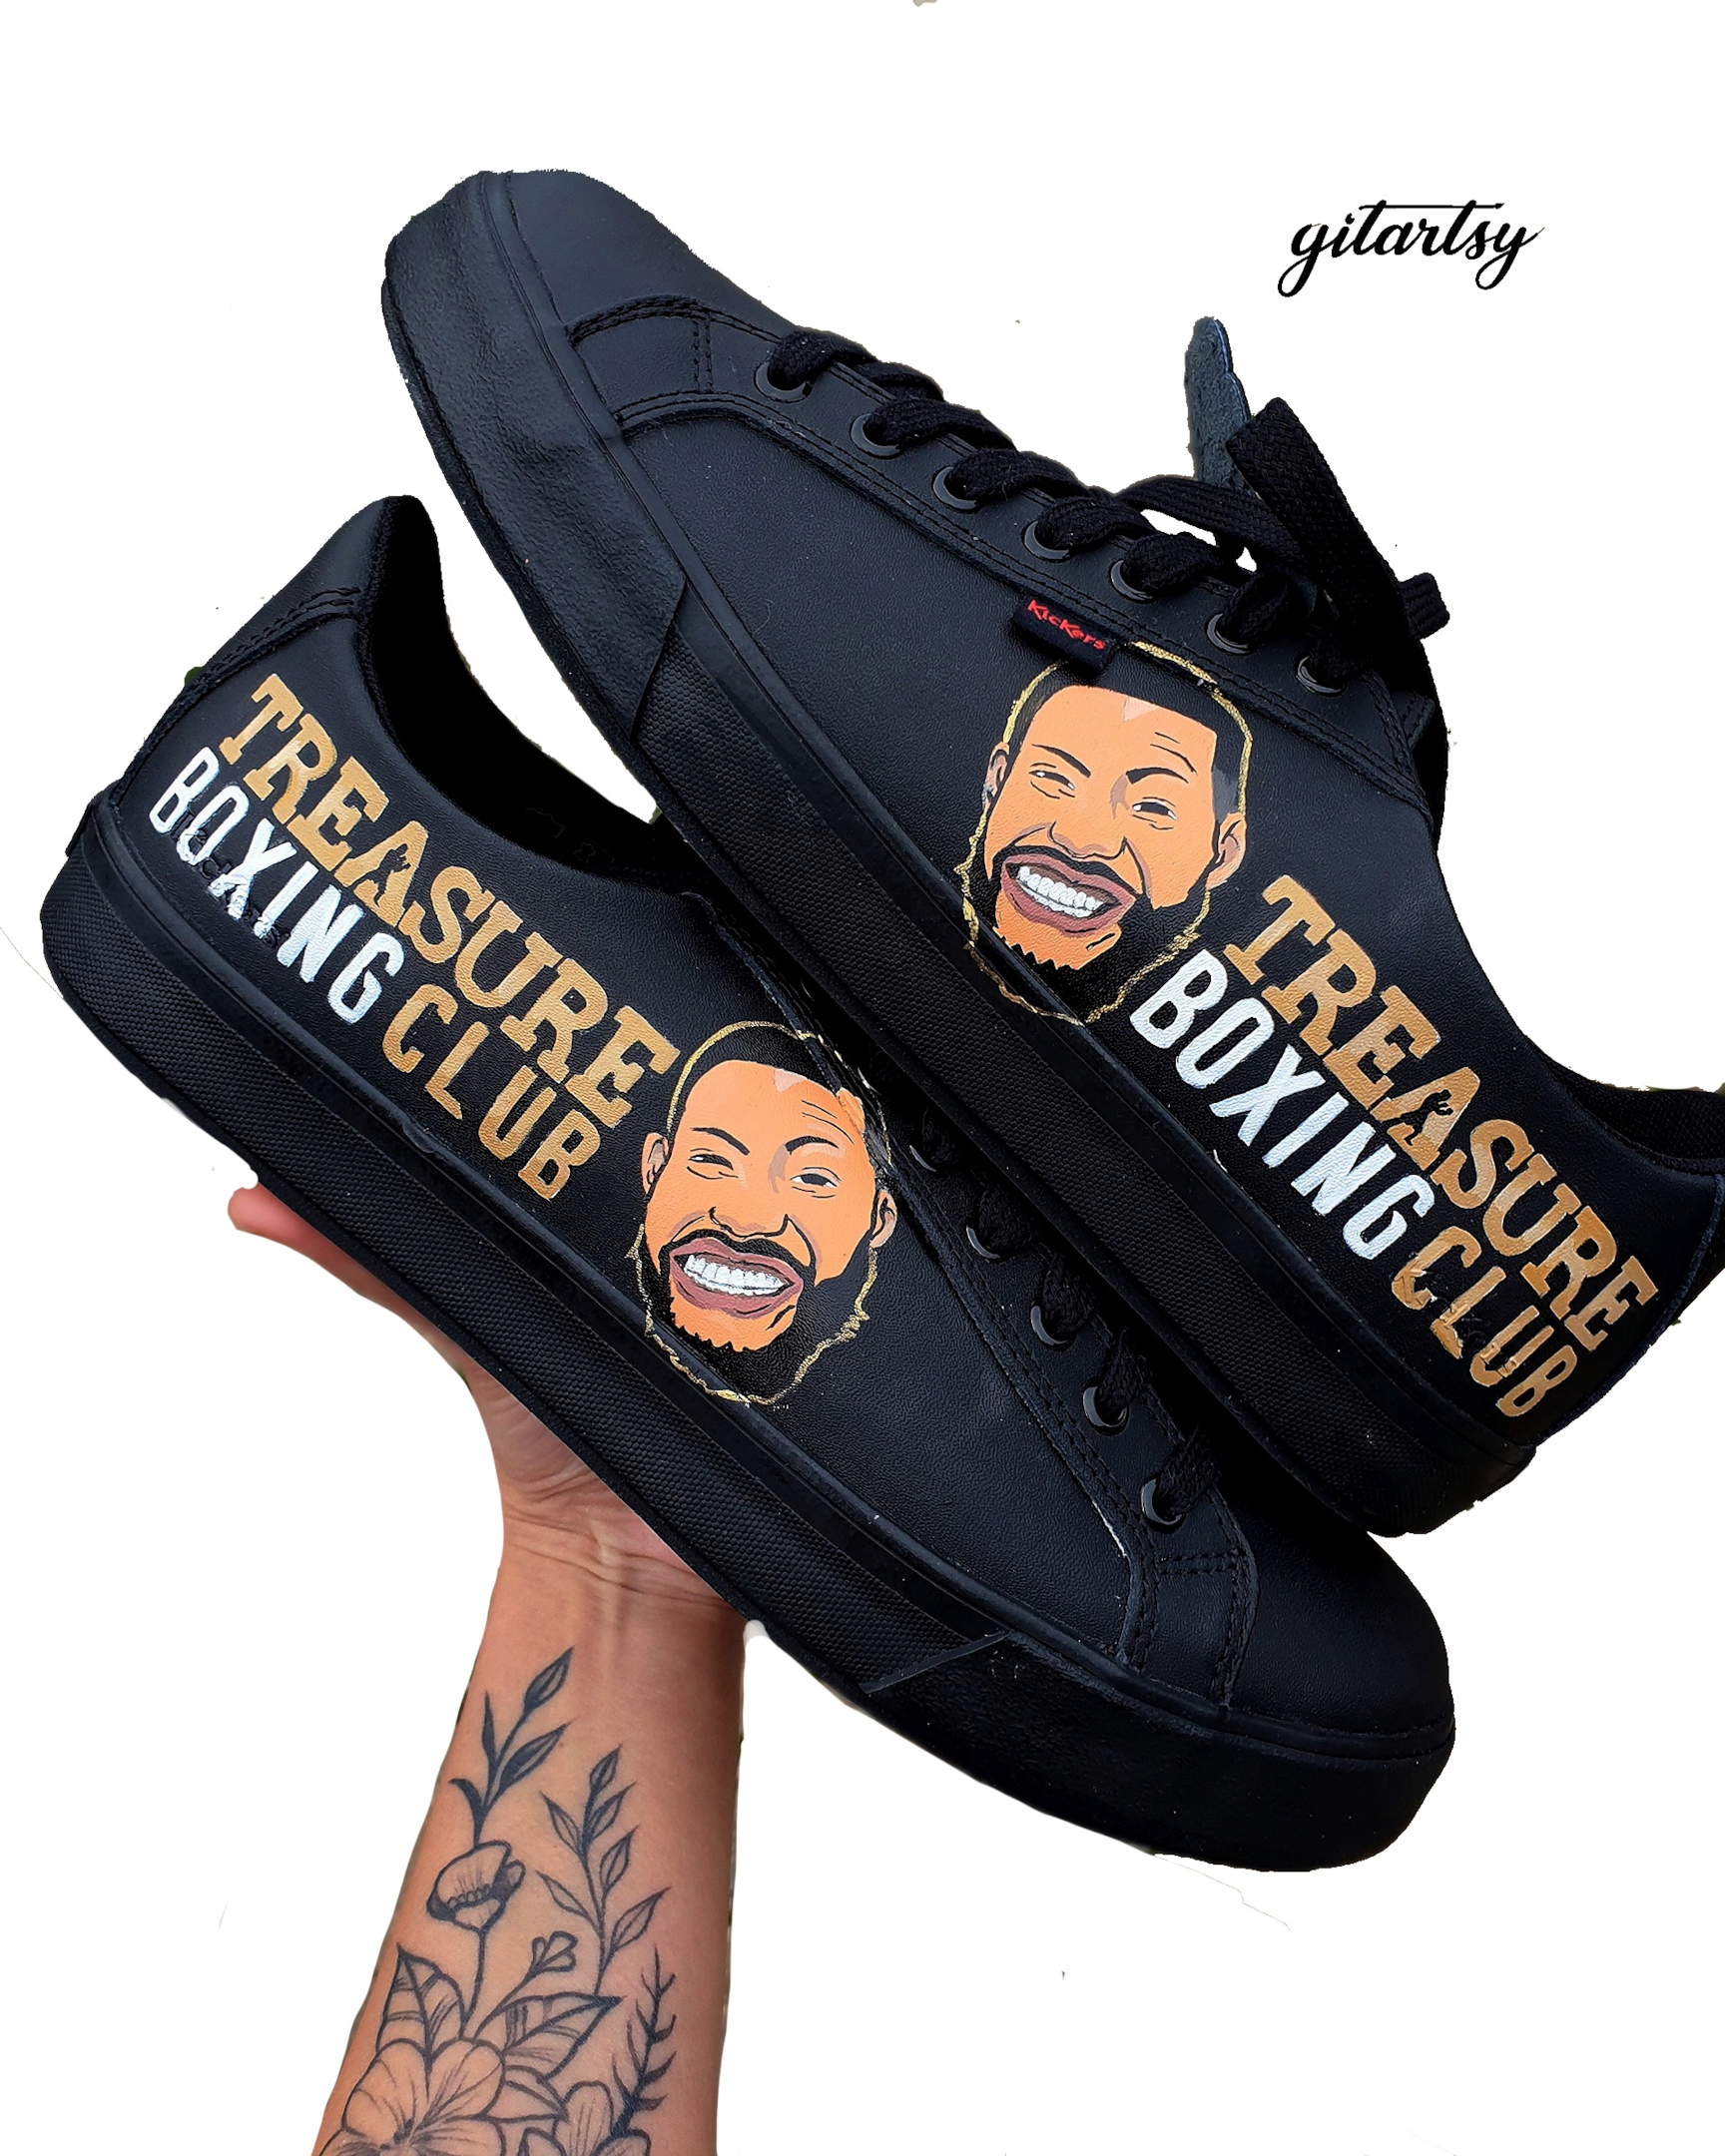 Custom sneakers painted for Boxing business - "Treasure boxing club" 